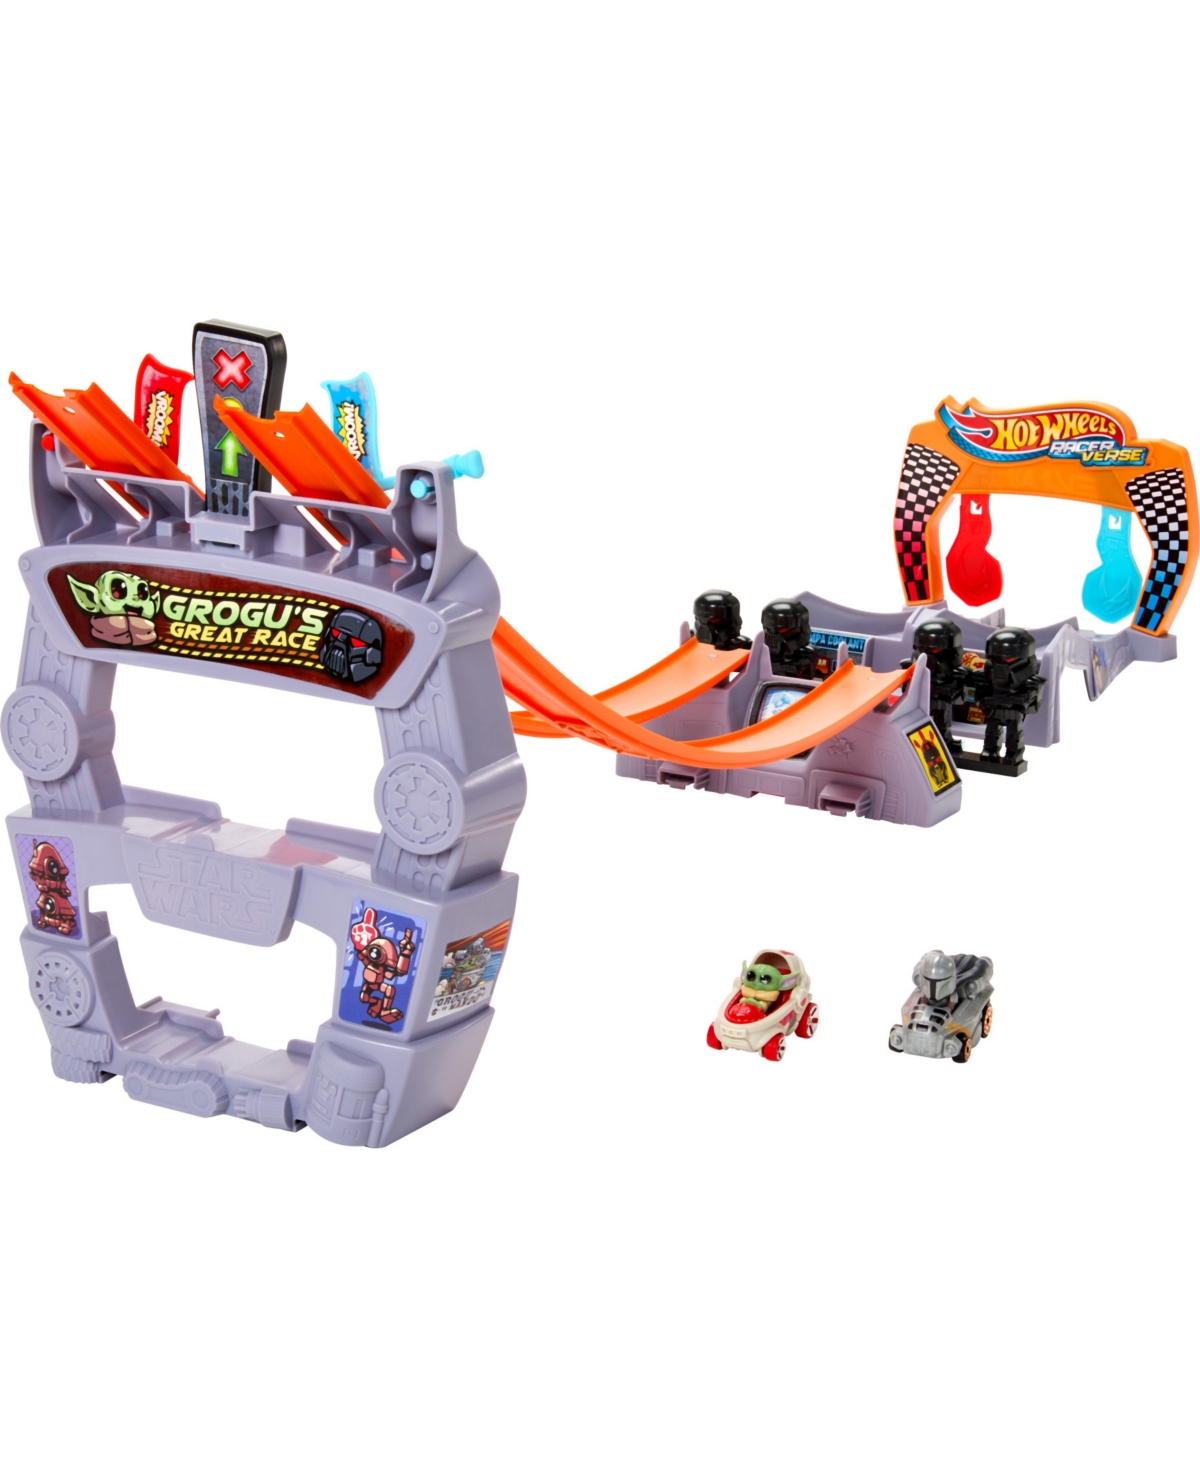 Hot Wheels Kids' Racerverse, Star Wars Track Set With 2  Racers Inspired By Star Wars In Multi-color